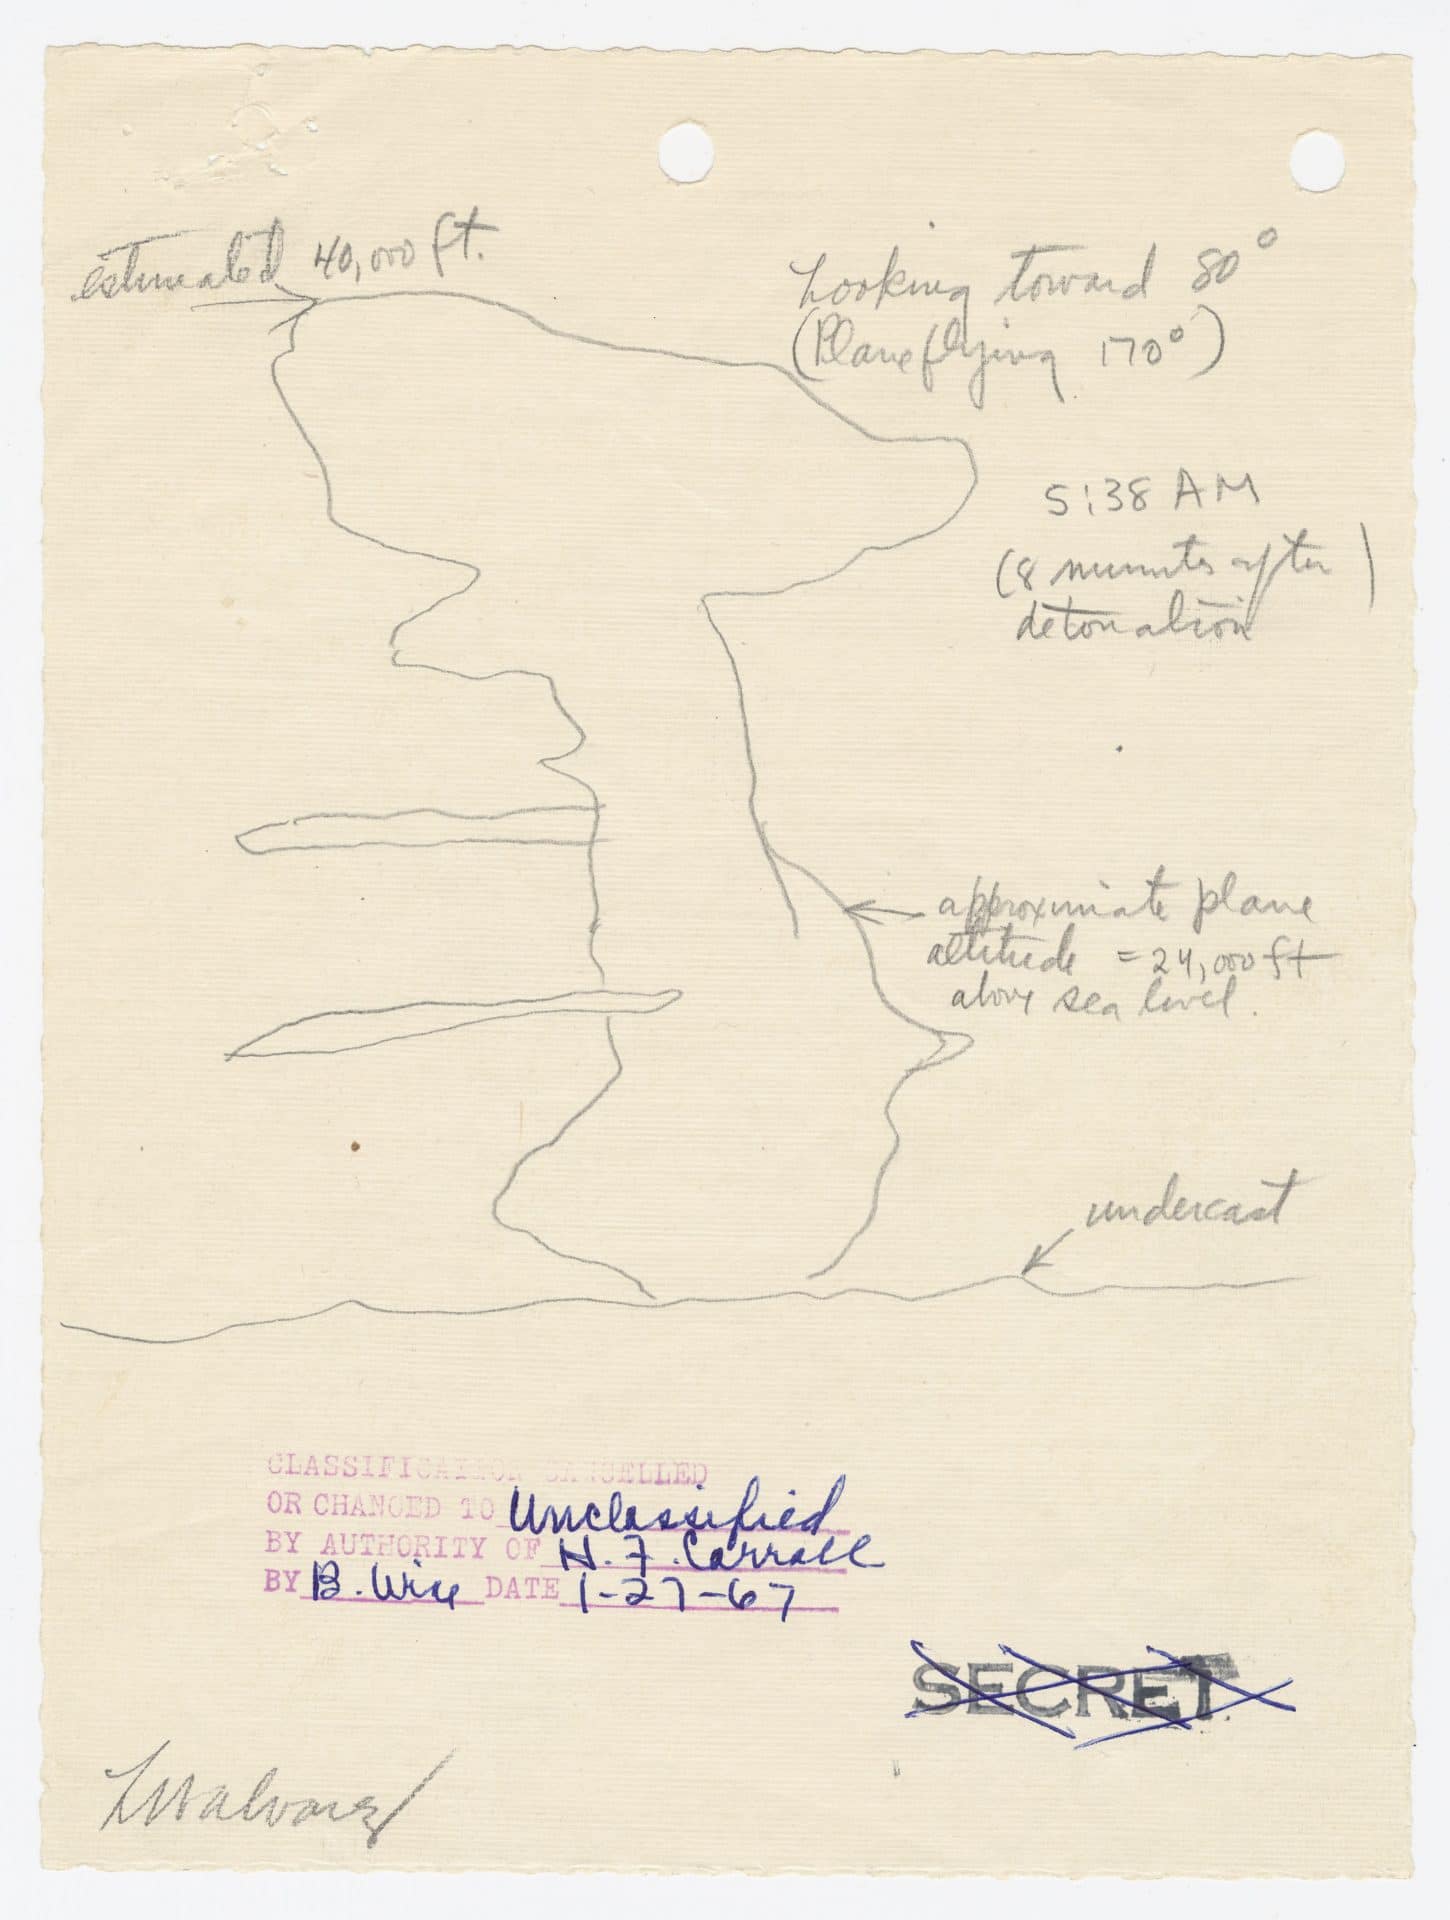 Sketches of the Trinity Test by Manhattan Project Physicist Luis W. Alvarez, 1945